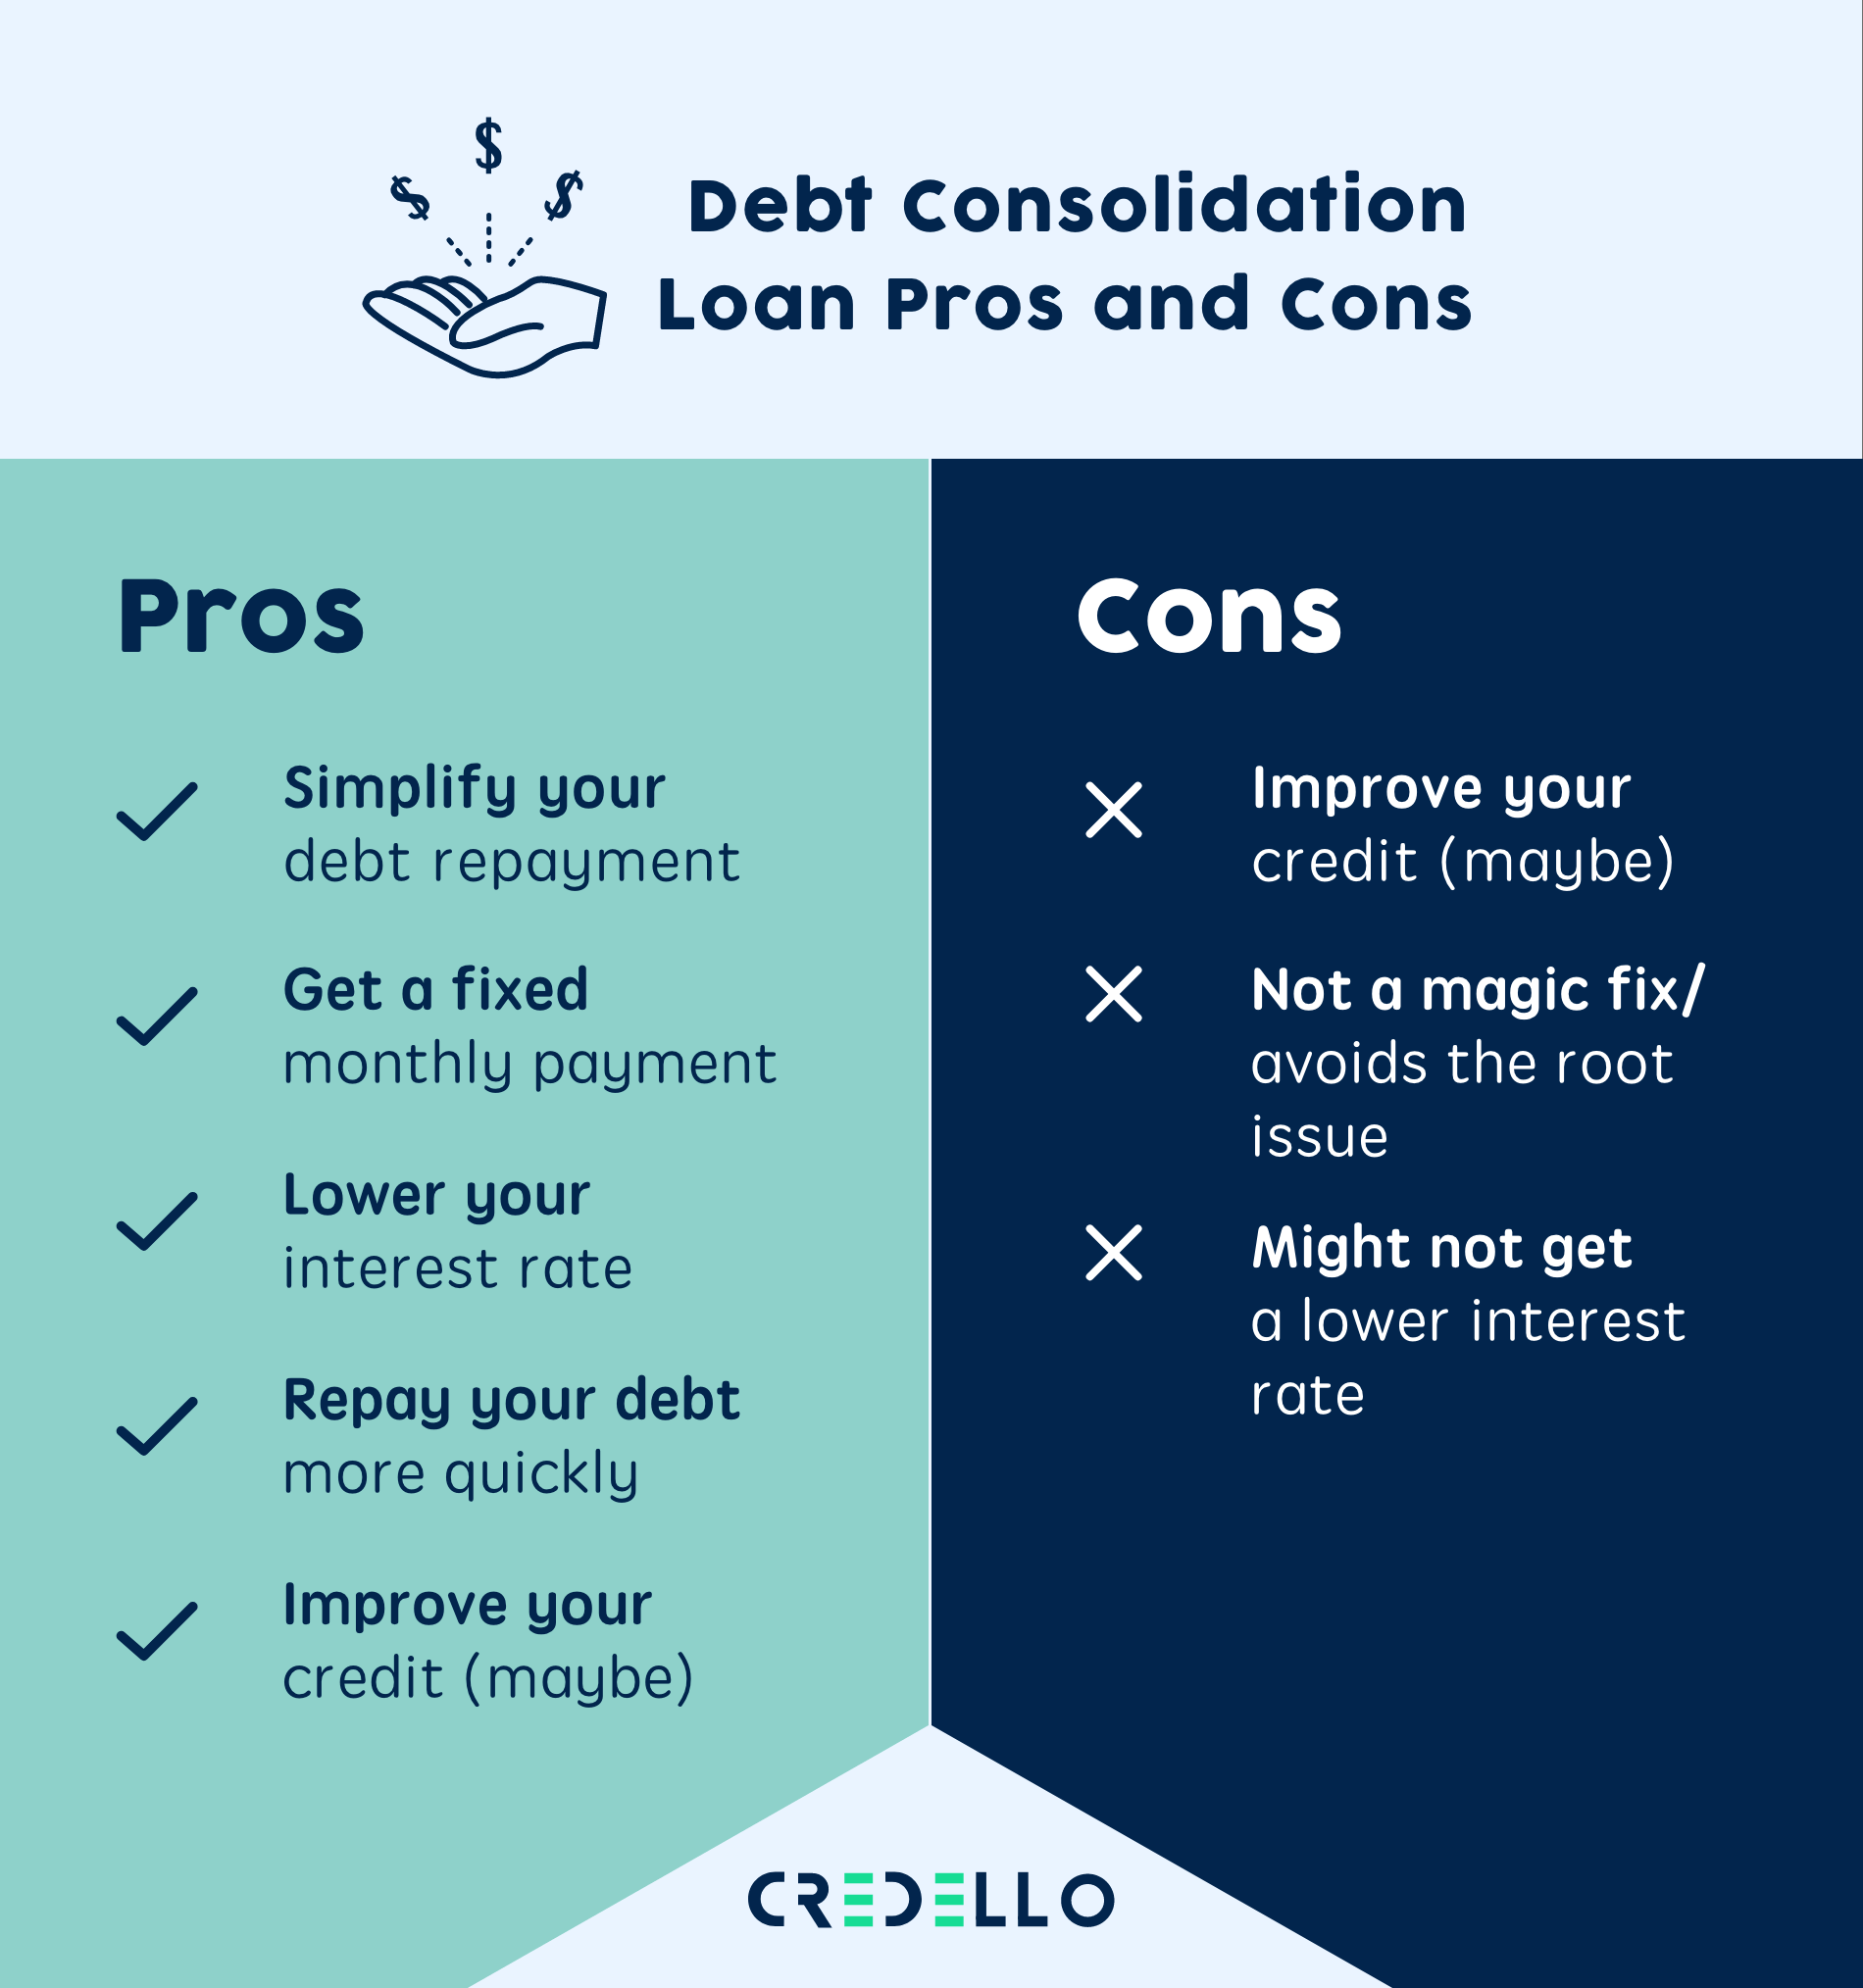 Debt Consolidation Loan Pros and Cons